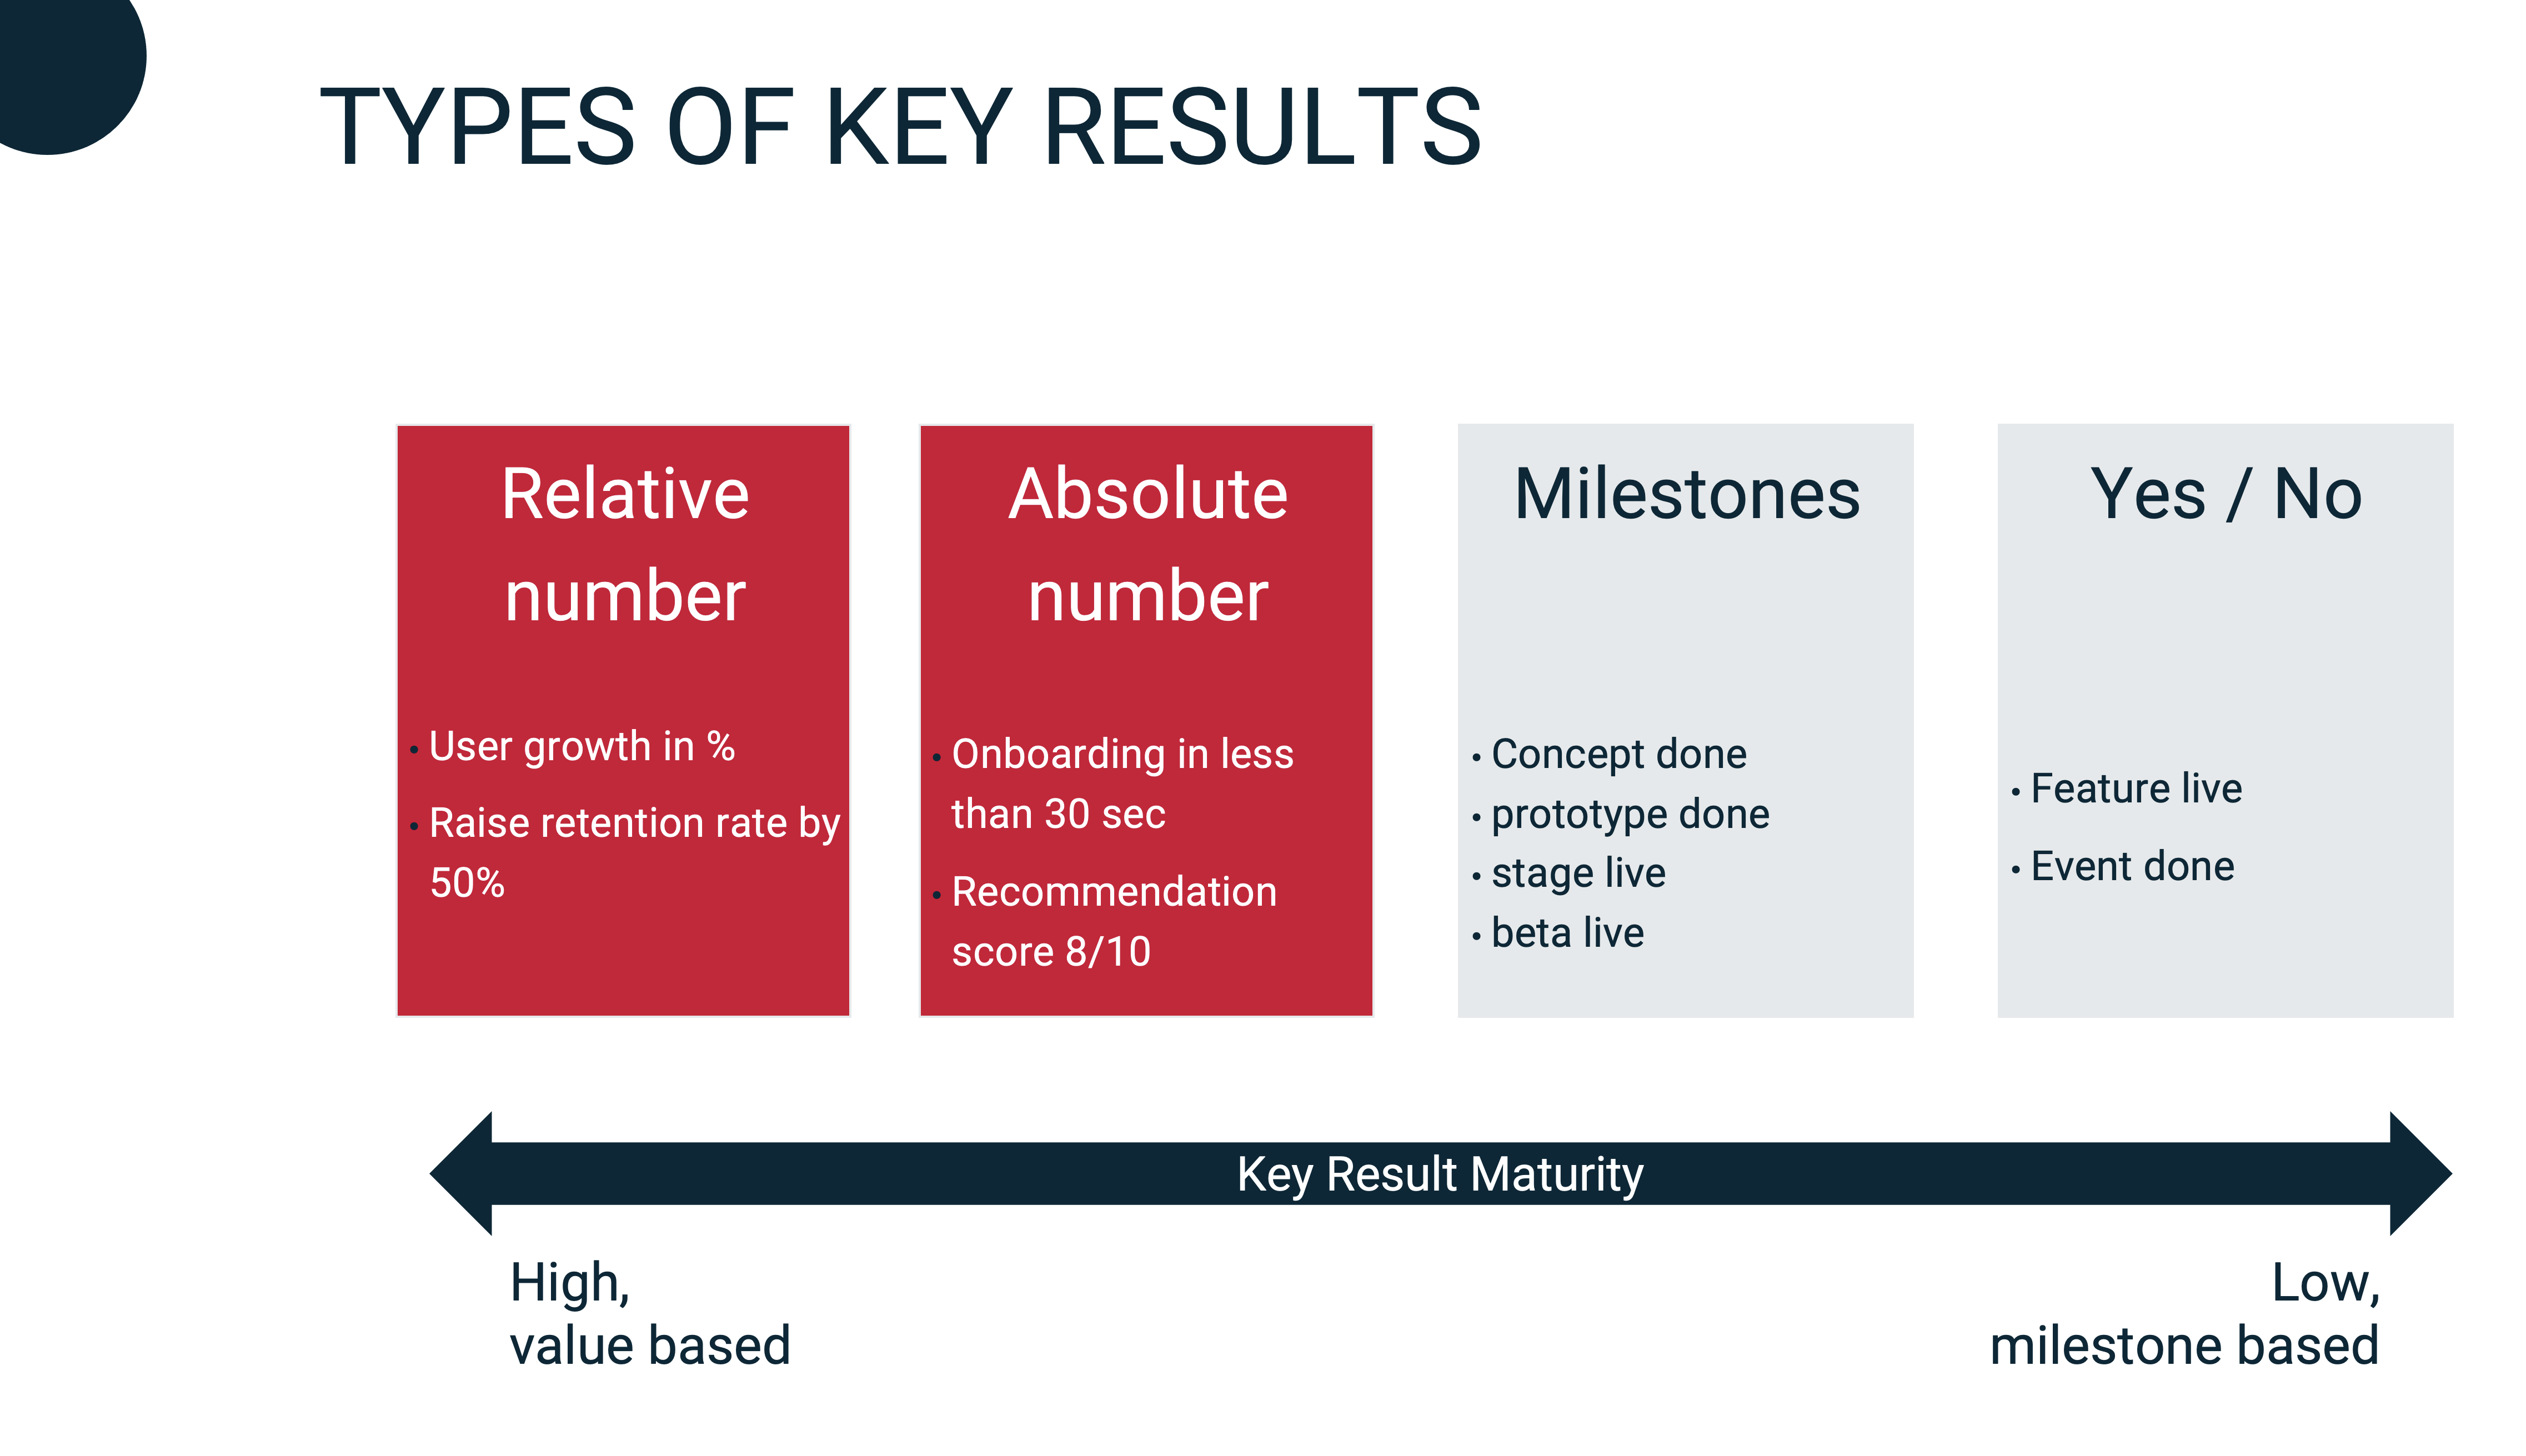 Types of Key Results